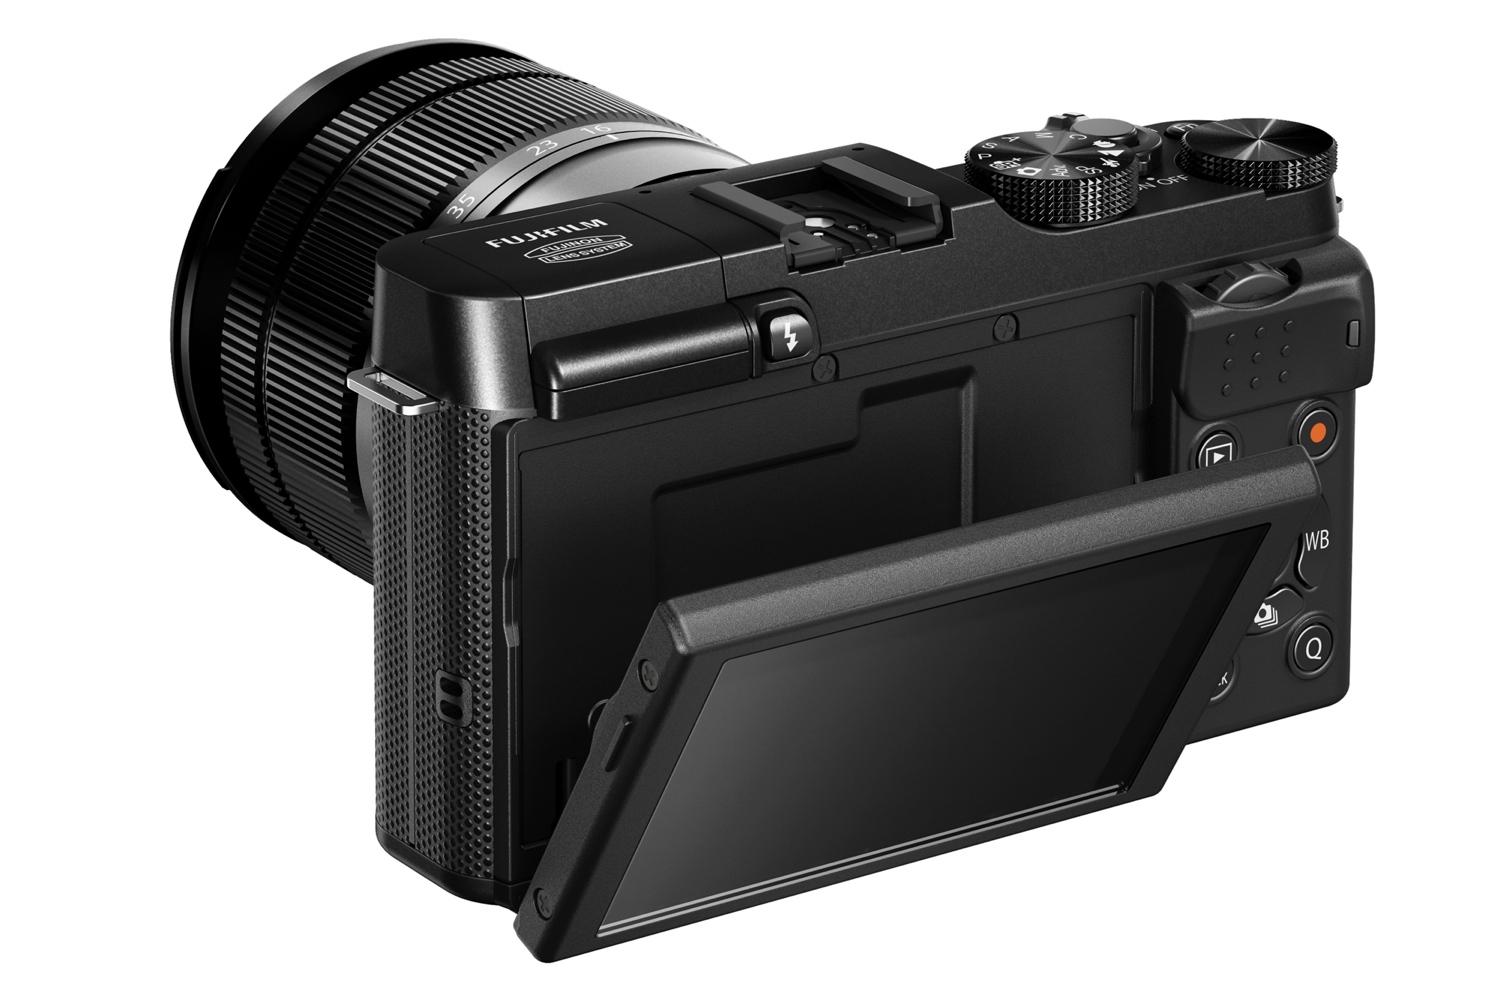 Fujifilm introduces the entry-level $600 X-A1 compact system